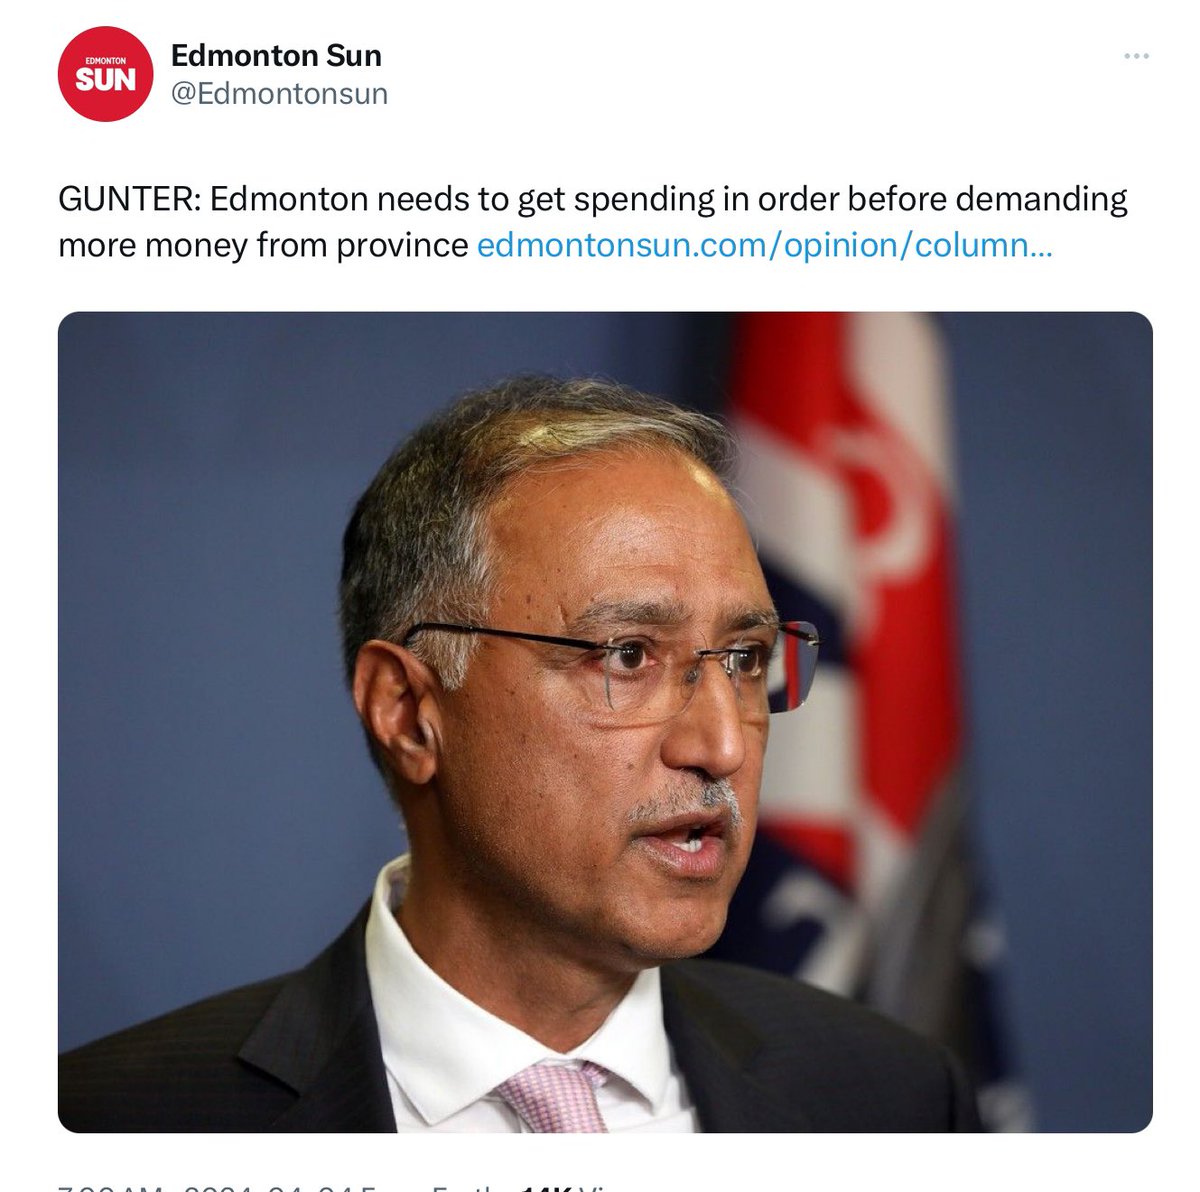 “The key fact is that the city’s income from residential and business taxes has exceeded the rate of growth of inflation and population.” Except this “key fact” in the @Edmontonsun is clearly incorrect and it’s frustrating to see it’s presented as a fact. #yeg #yegcc